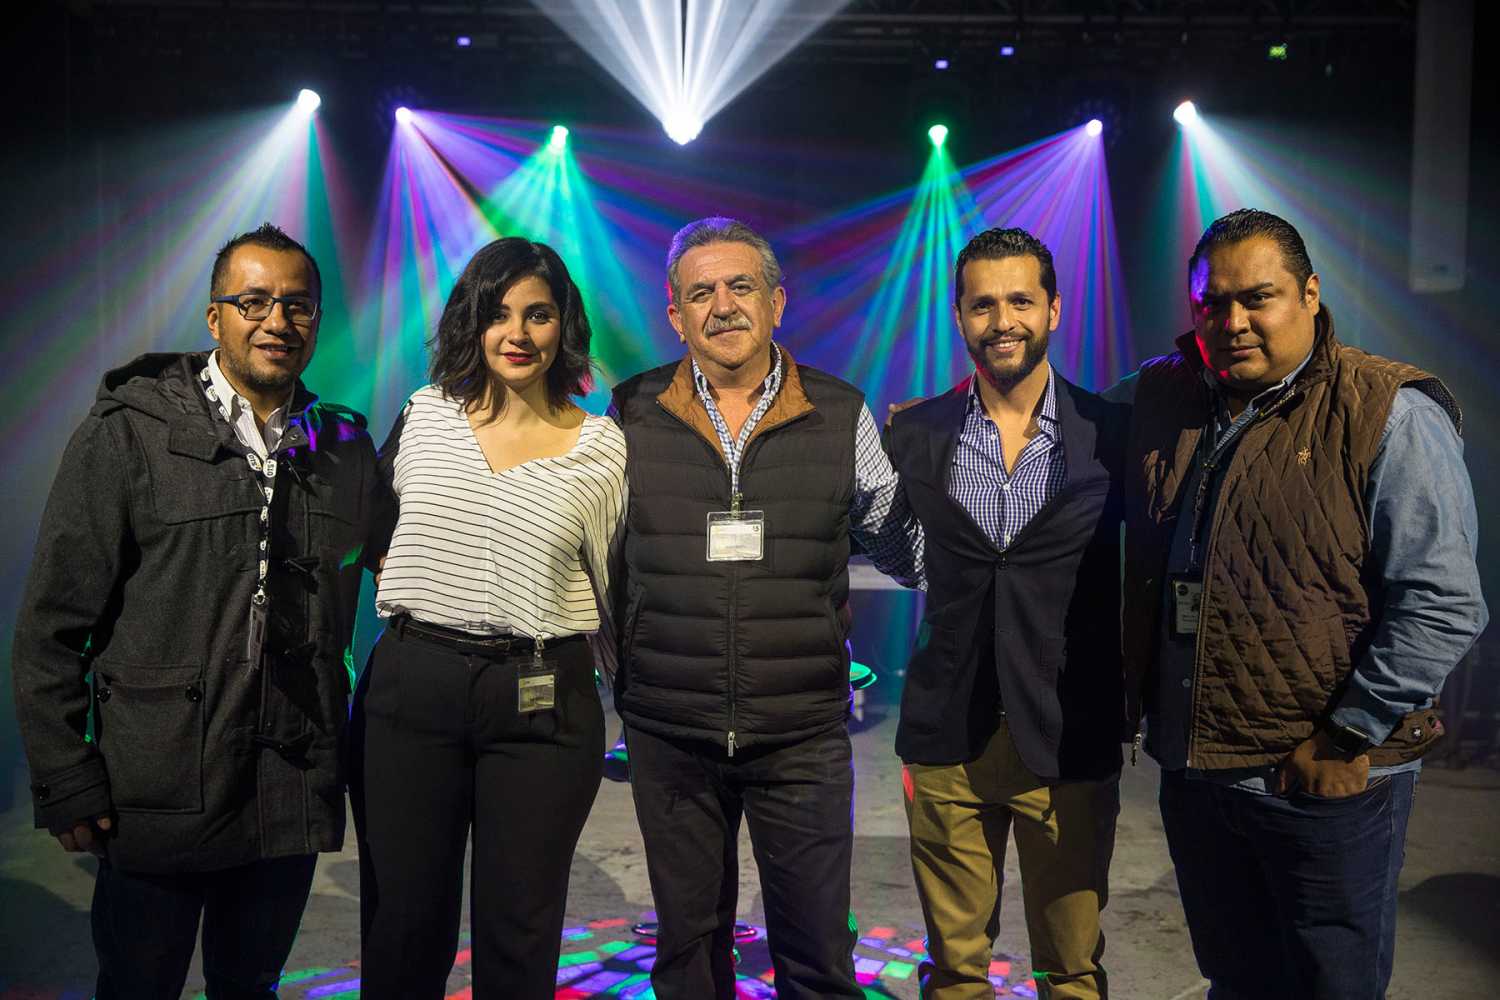 Luis Rosales (Showco), Carla Hernández (financial administrator), Gerardo Hernández (owner / founder / general manger) and Gerardo Pineda (project manager) all from Ganesha Producciones  and Showco’s Mario Vazquez